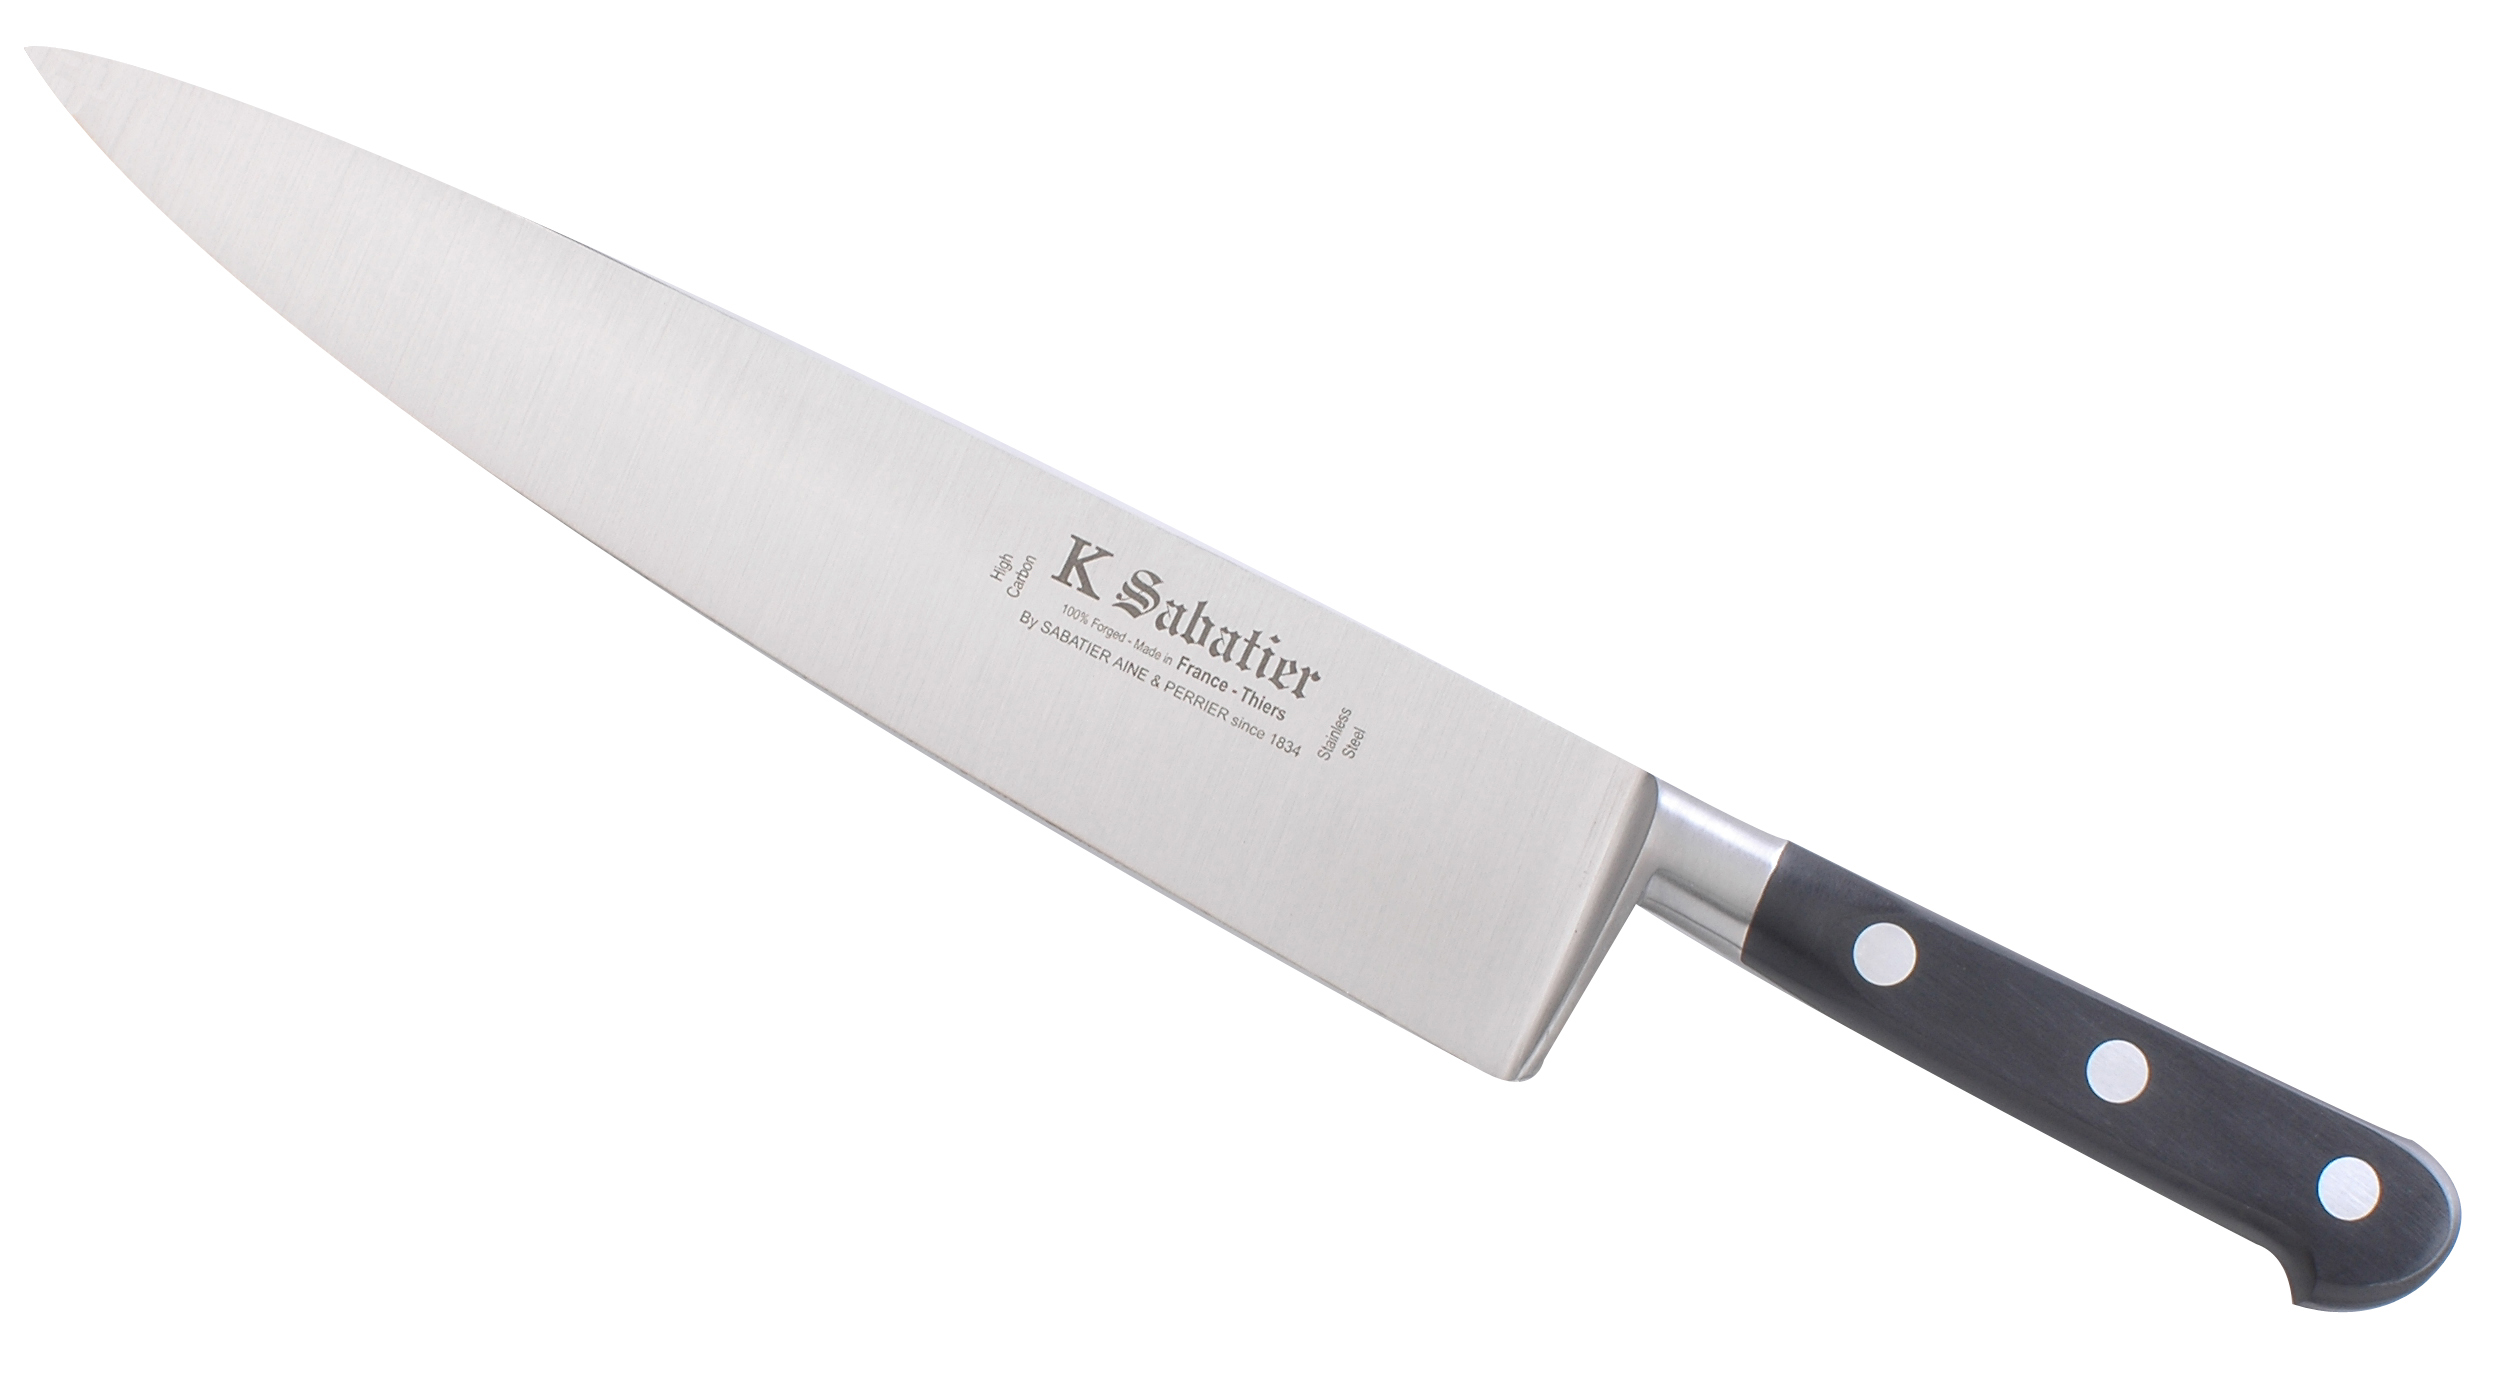 Knives Cooking Knife 10 in - Authentique